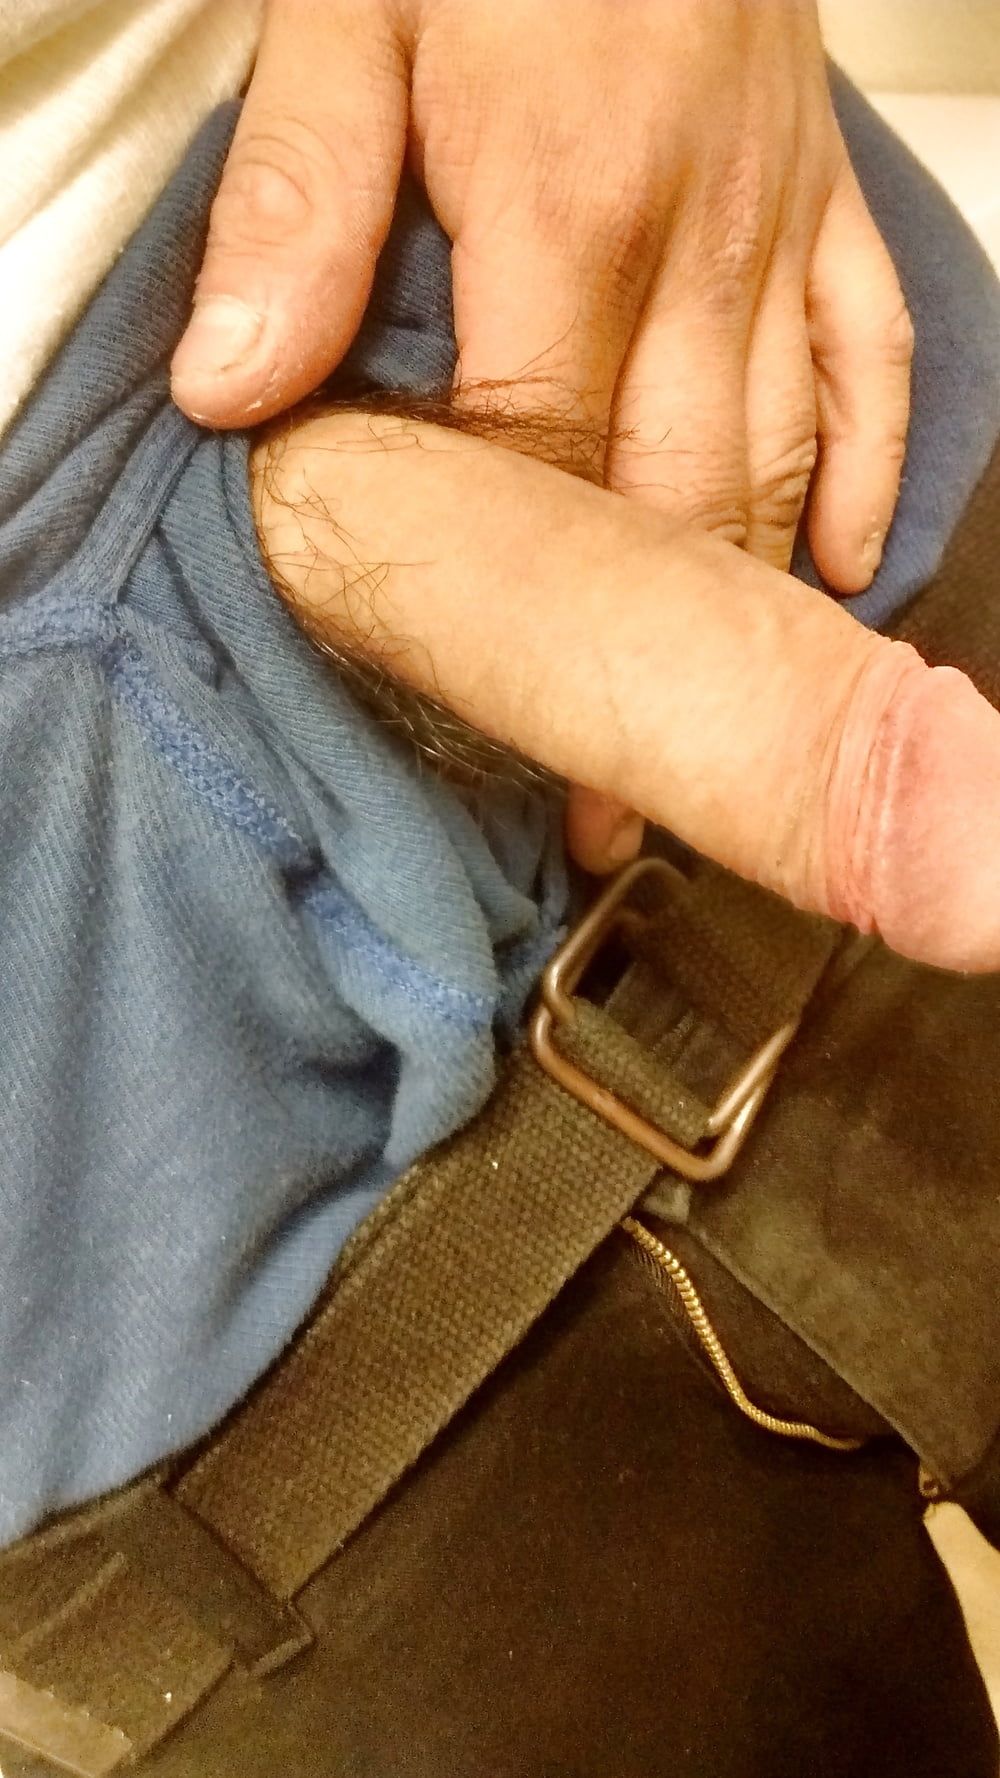 What my cock #7